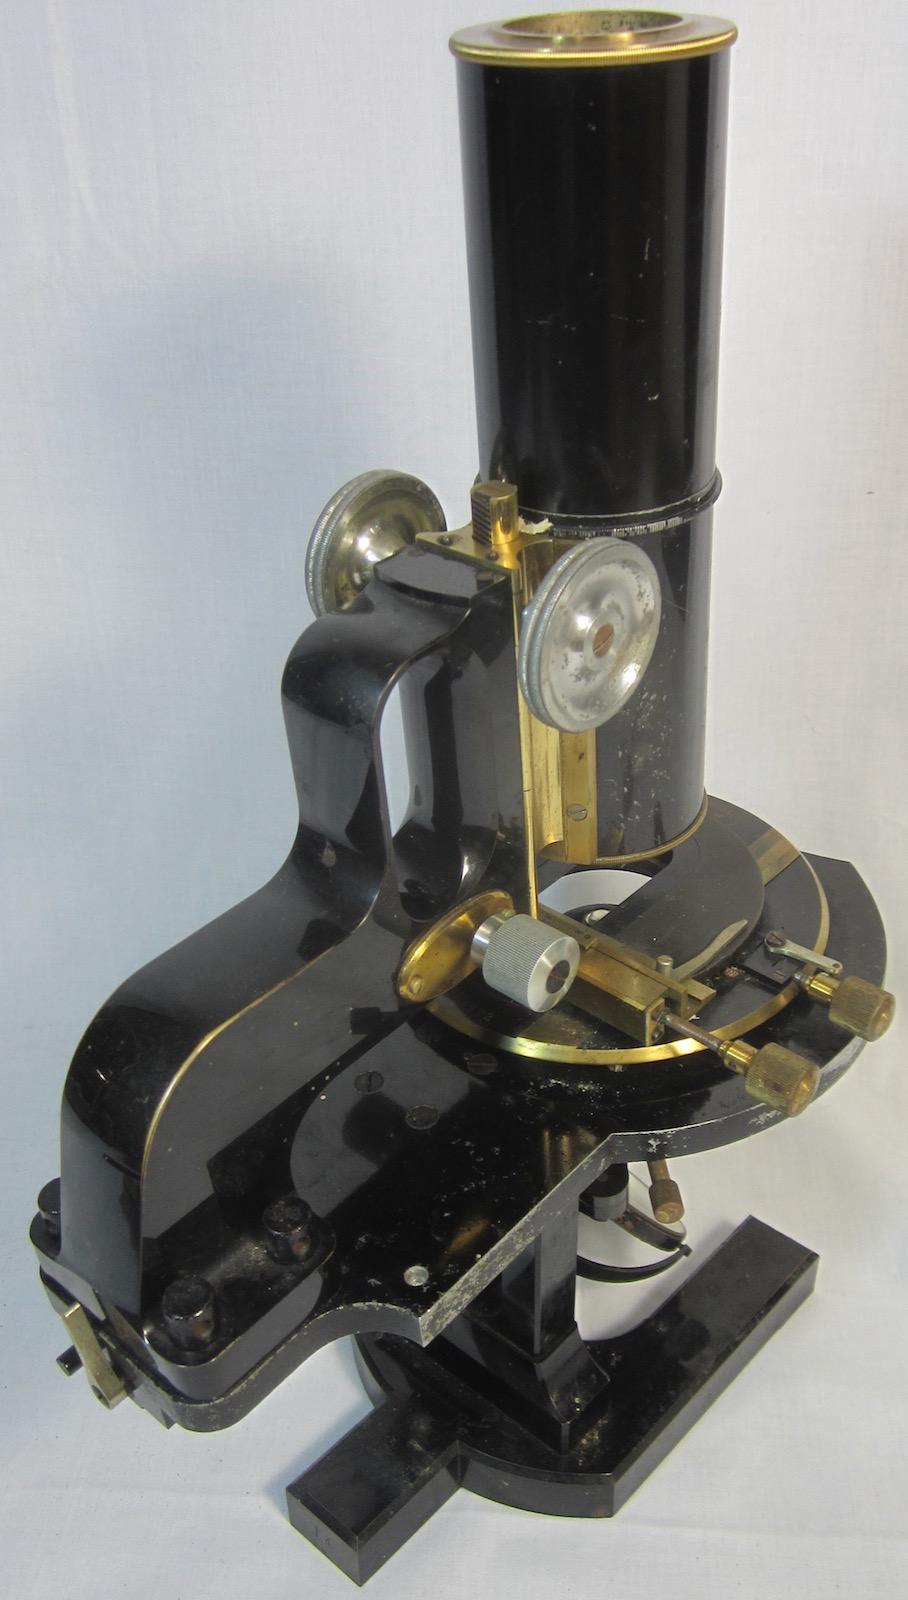 Carl Zeiss Jena no36501 laboratory microscope,
with 12 lenses in a bespoke wooden case,
microscope weighs 10kg, 17kg including case,
microscope 16 x 18 x 40cm high, case 29 x 34 x 42cm.